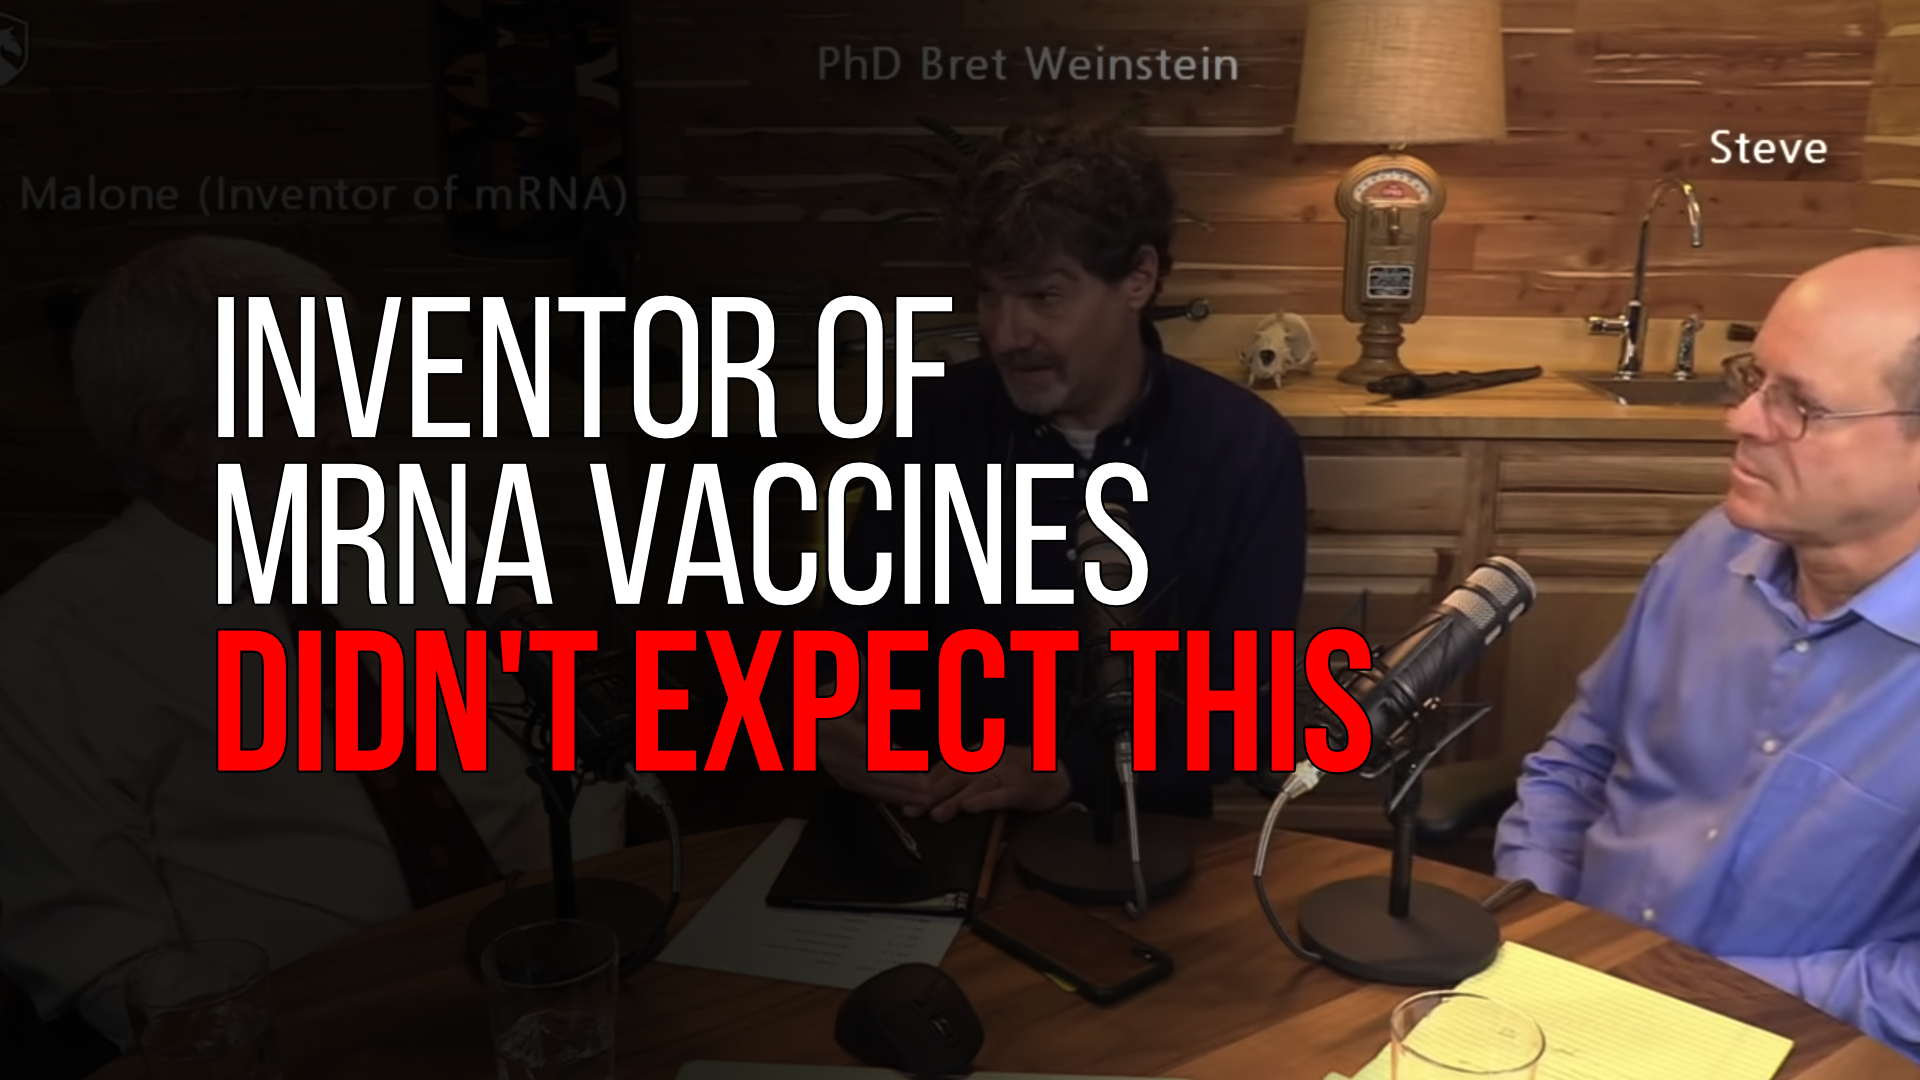 15 Minute video with Dr. Robert Malone – The inventor of the mRNA Vaccines